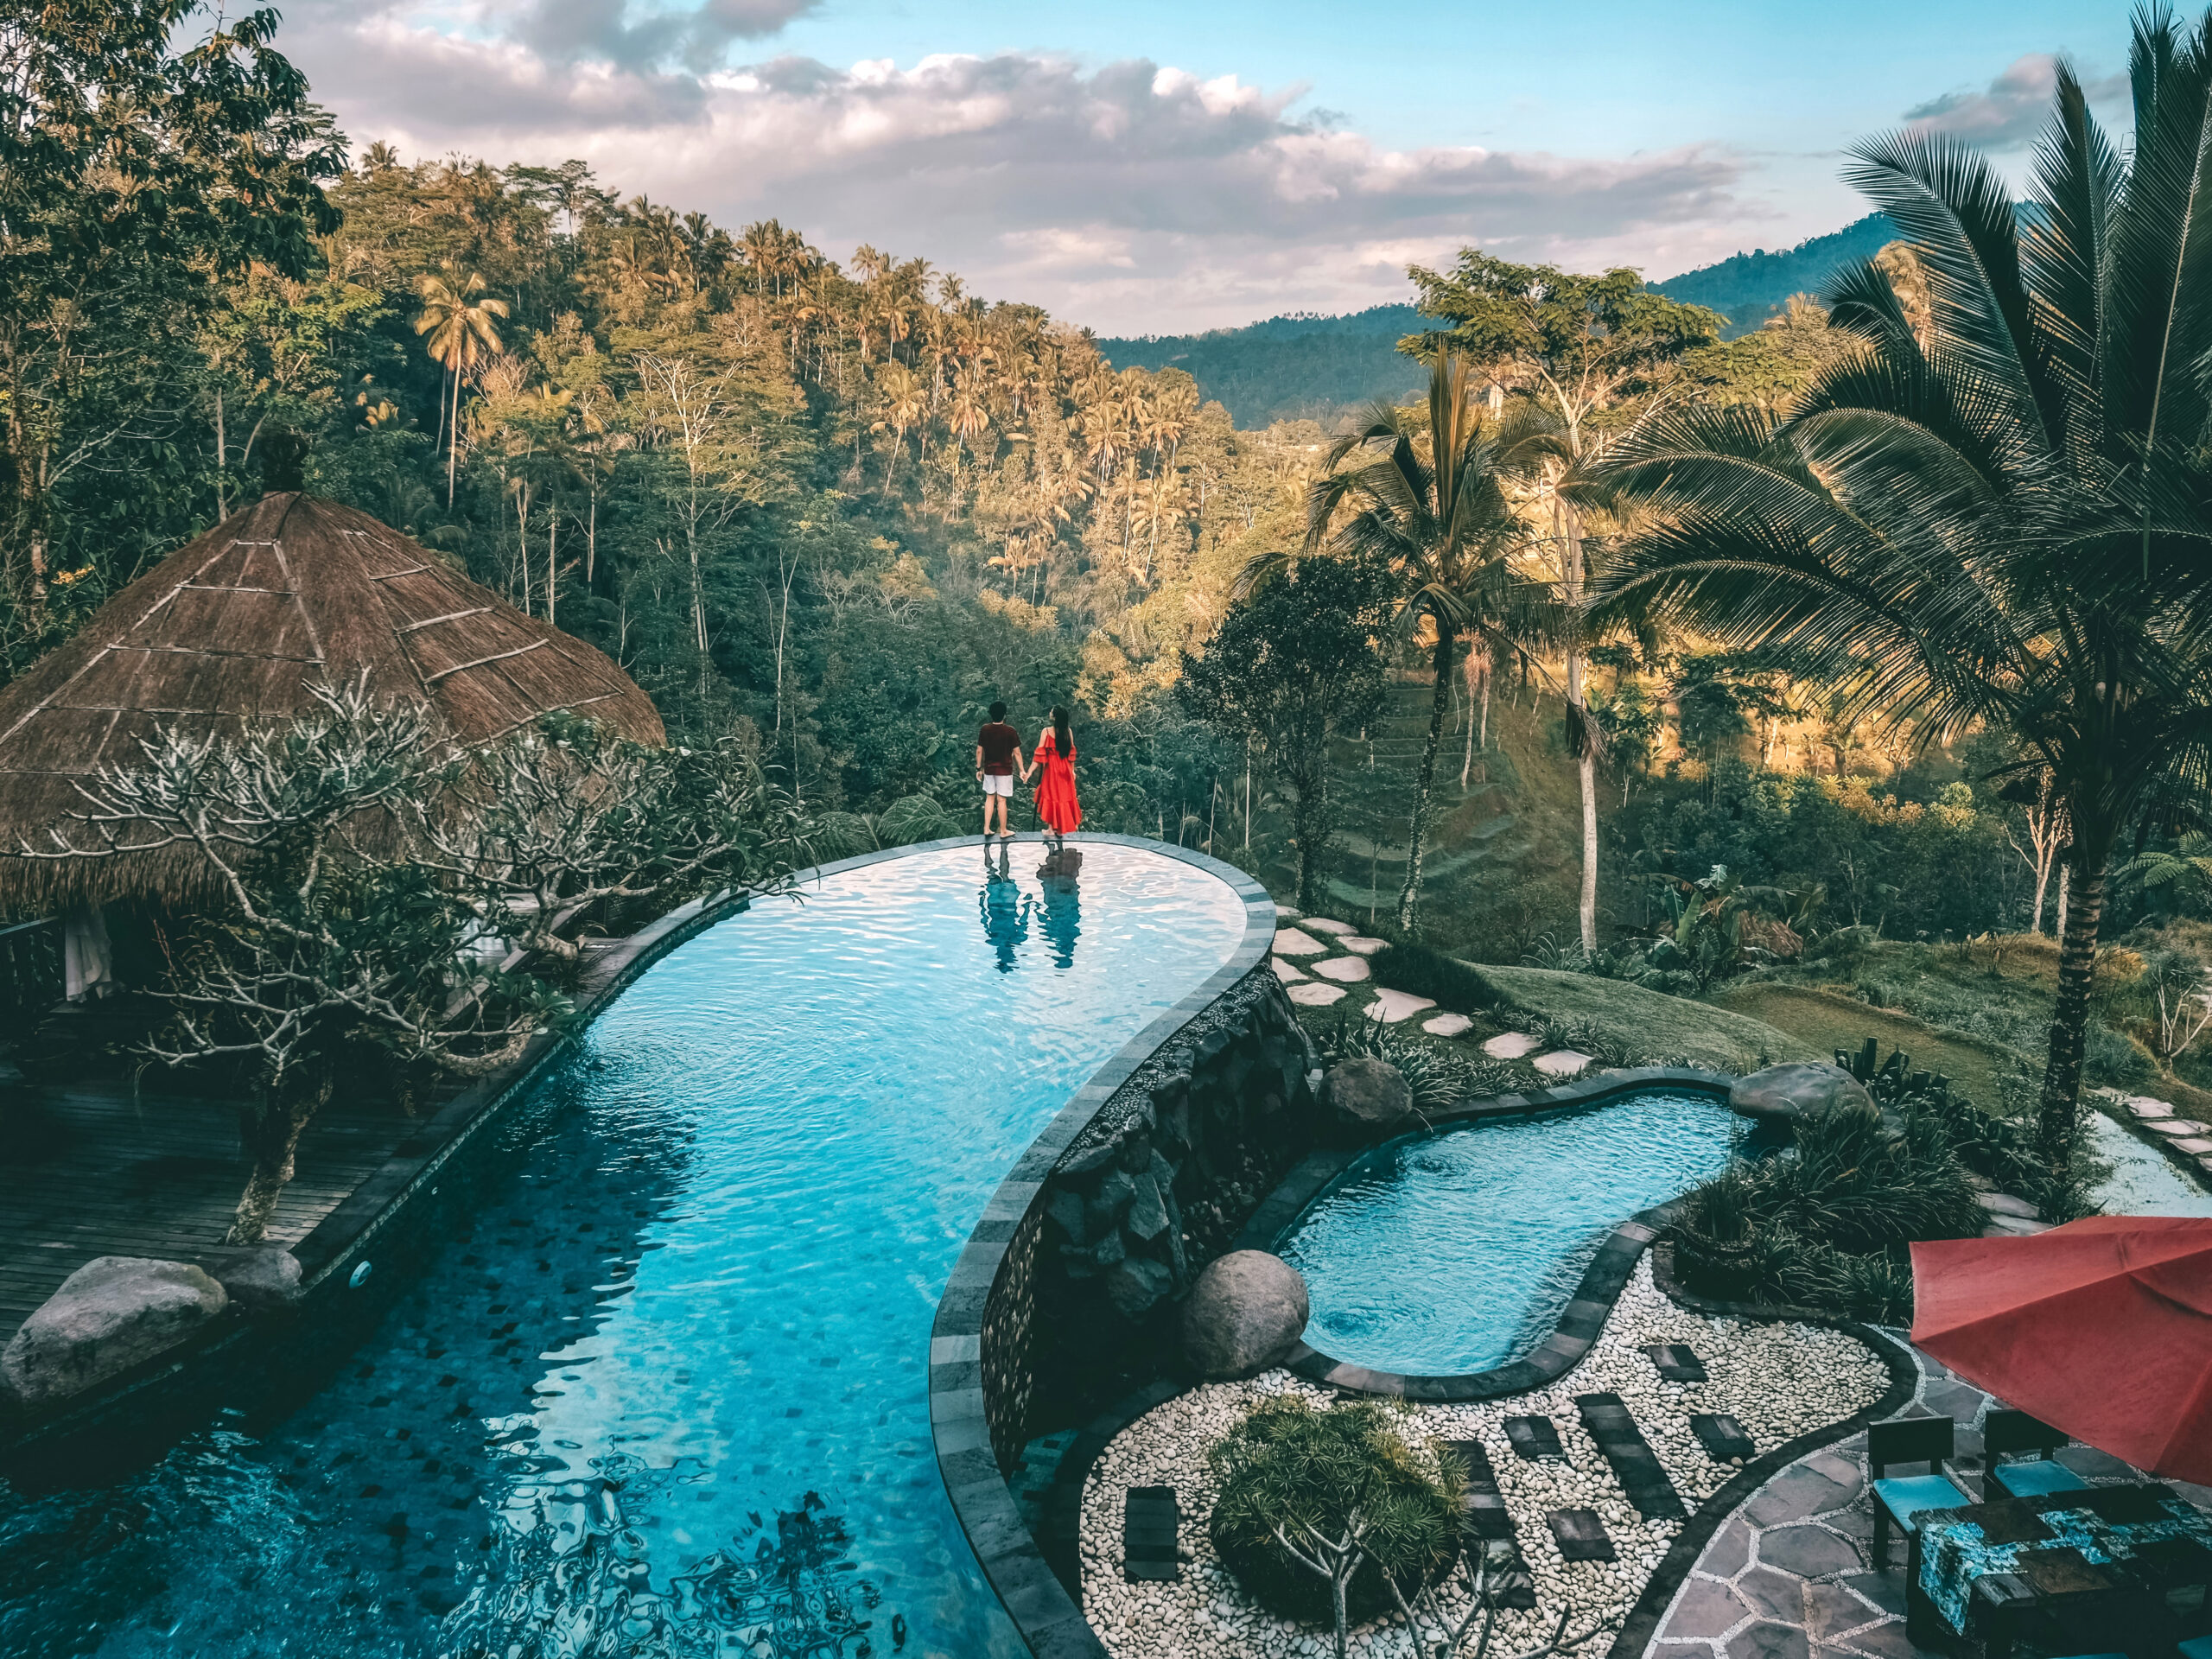 Bali Ubud with two people stnading at the edge of an infinity pool overlooking the green lush terraces|